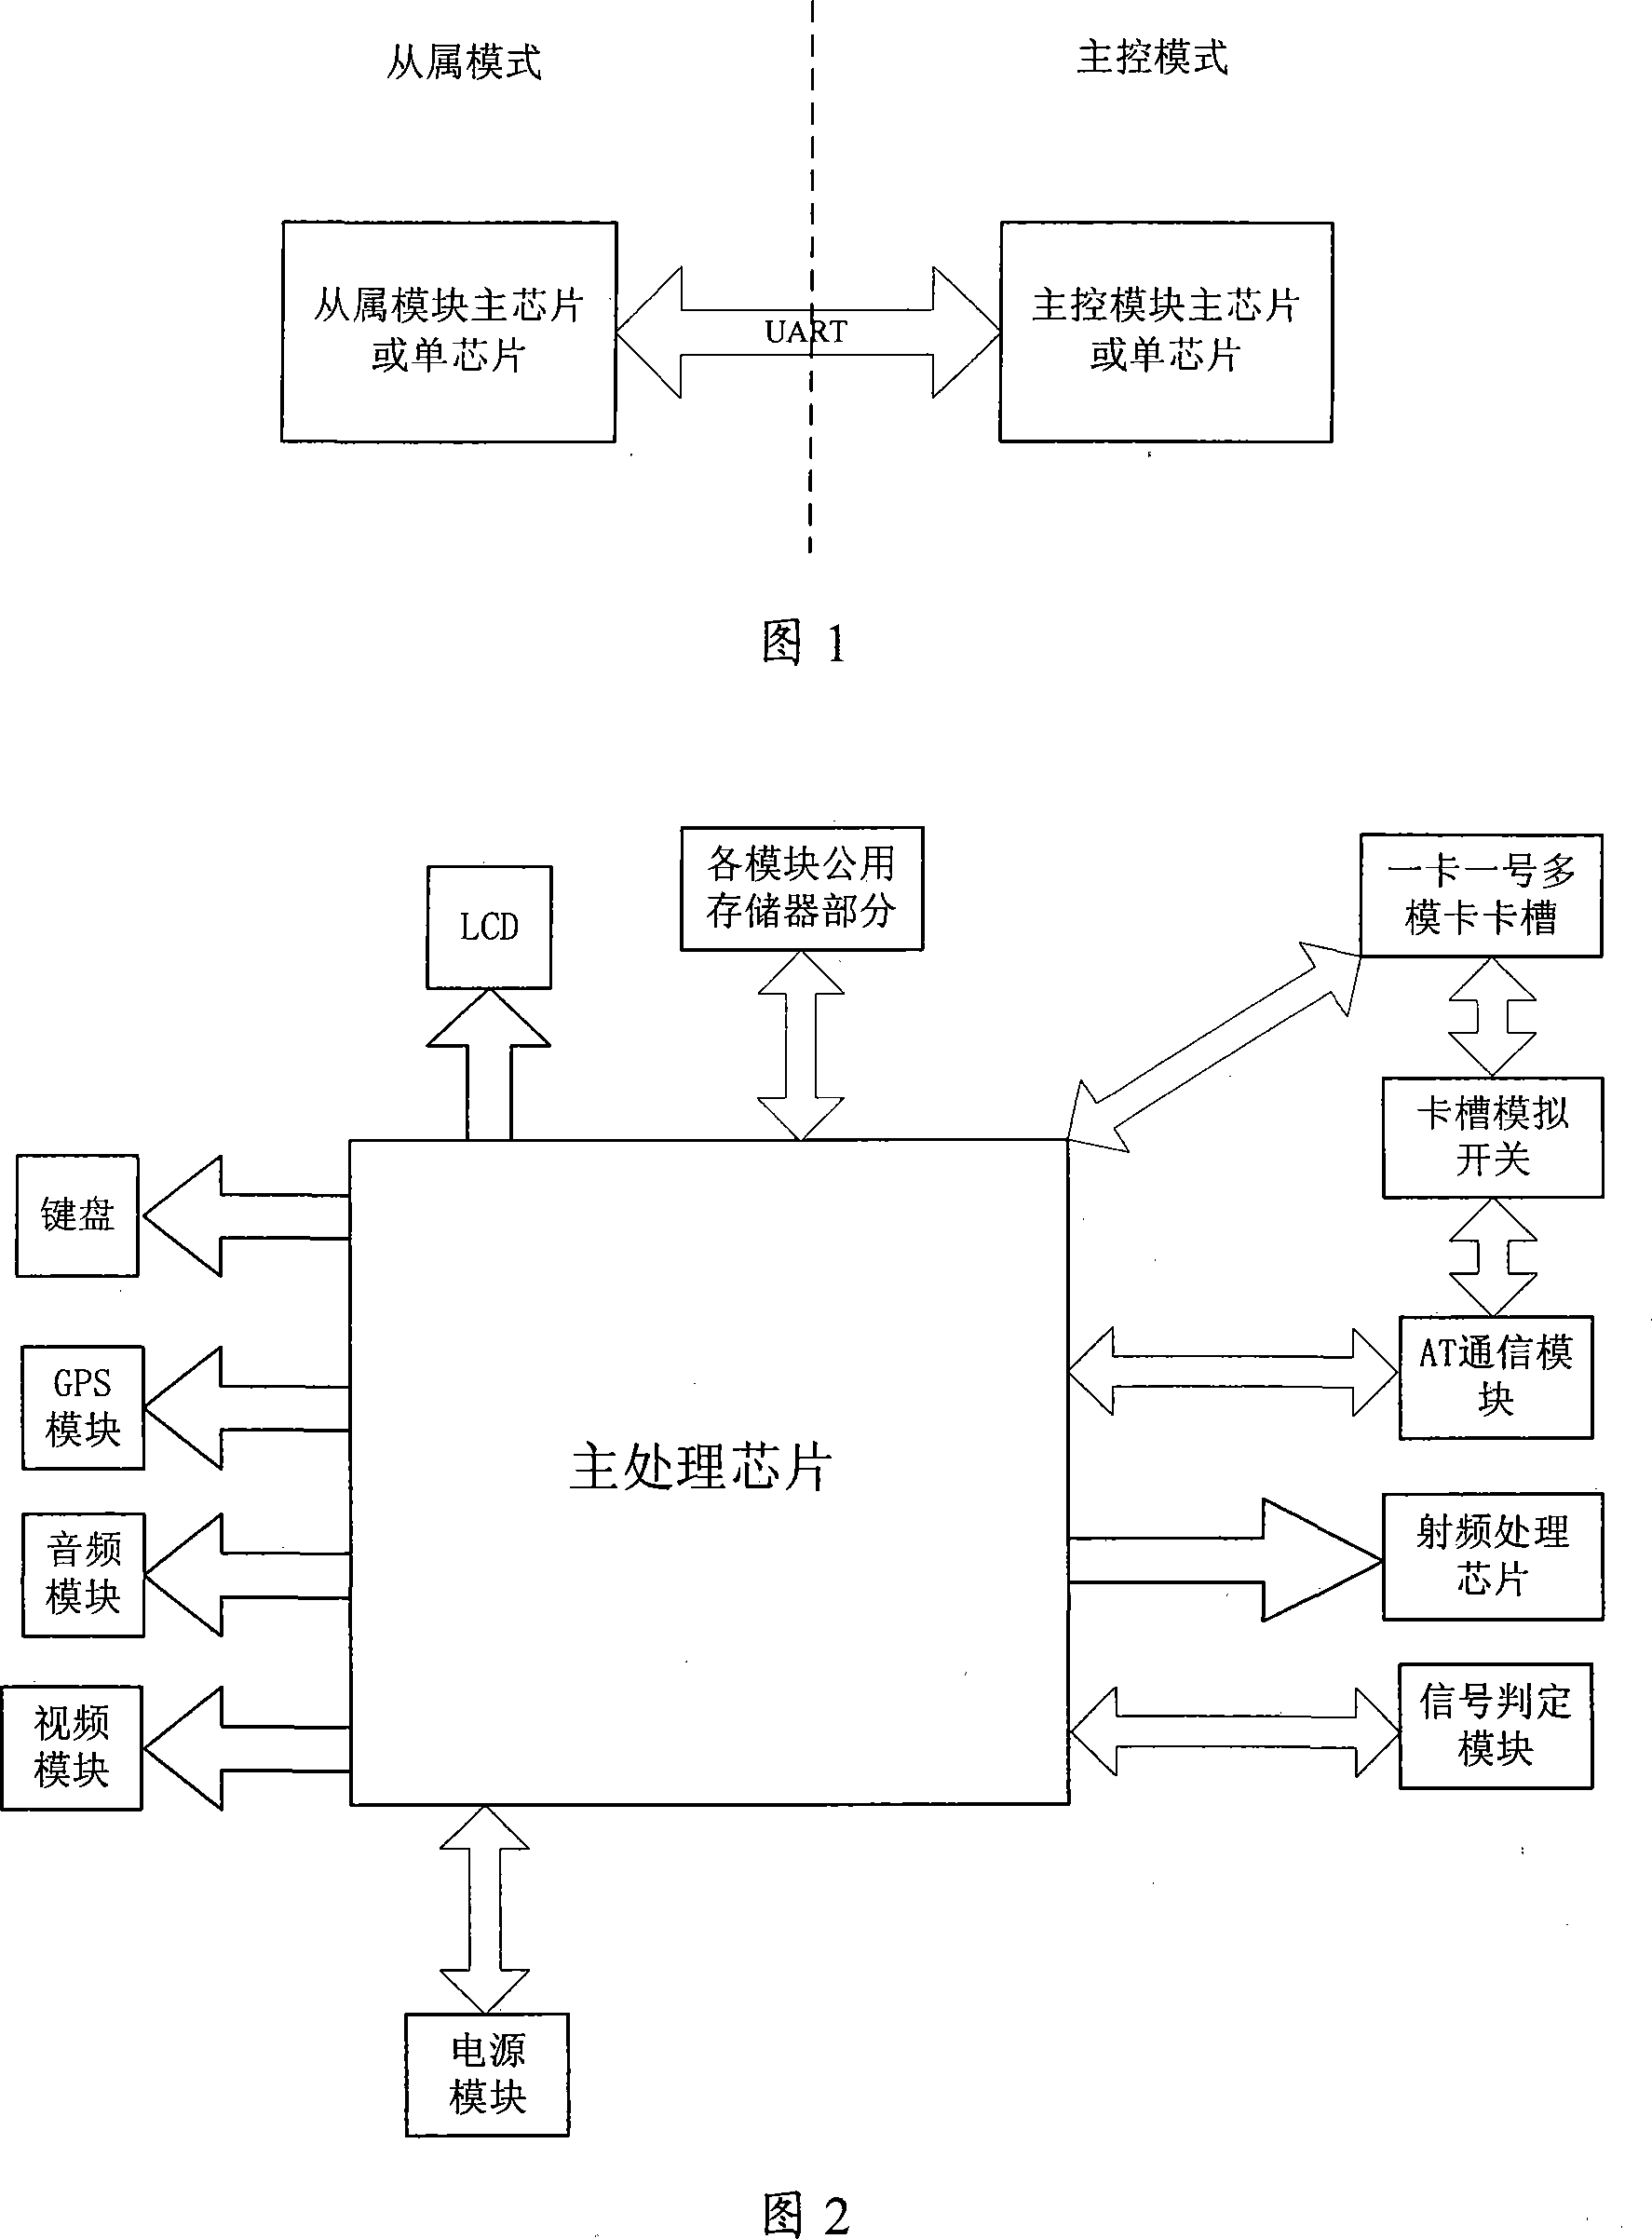 Multi-module machine and implementing method thereof